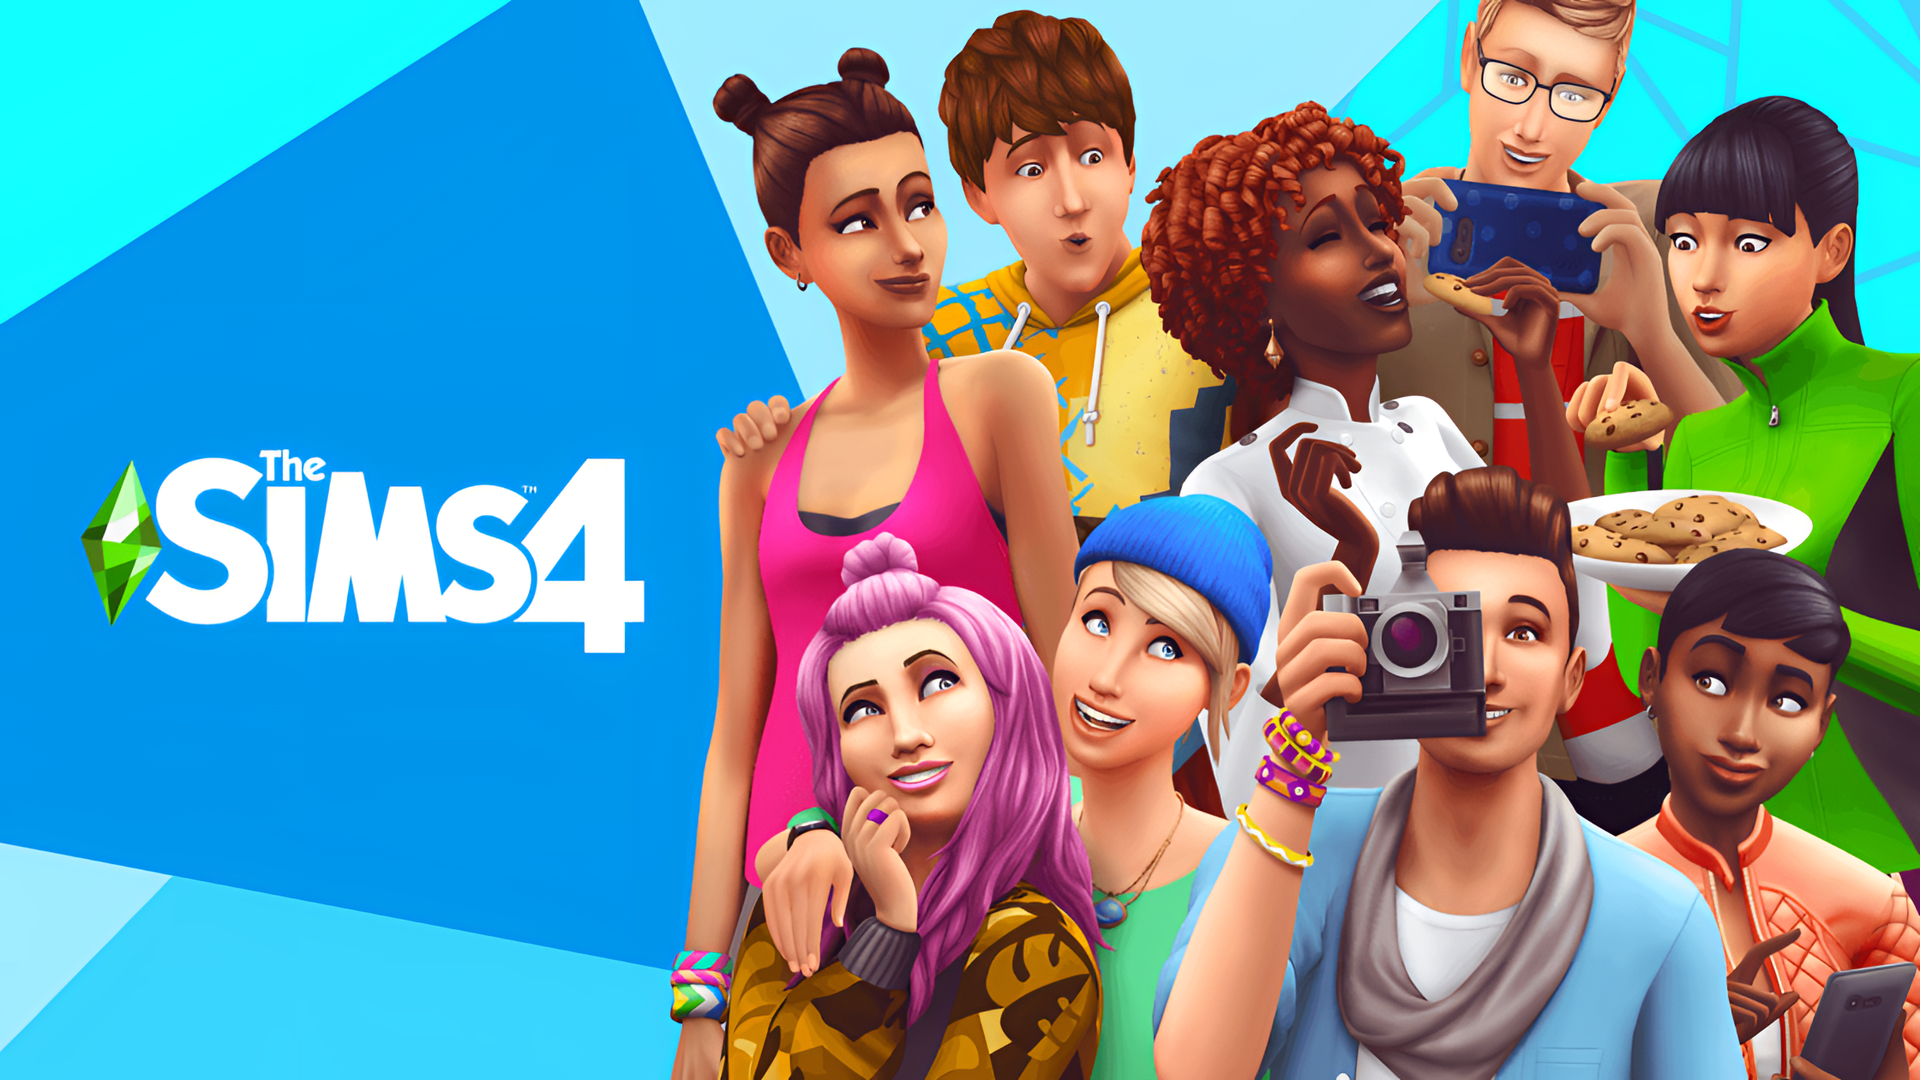 HD desktop wallpaper for The Sims 4 featuring a diverse group of animated characters engaging in various activities with a vibrant blue background.